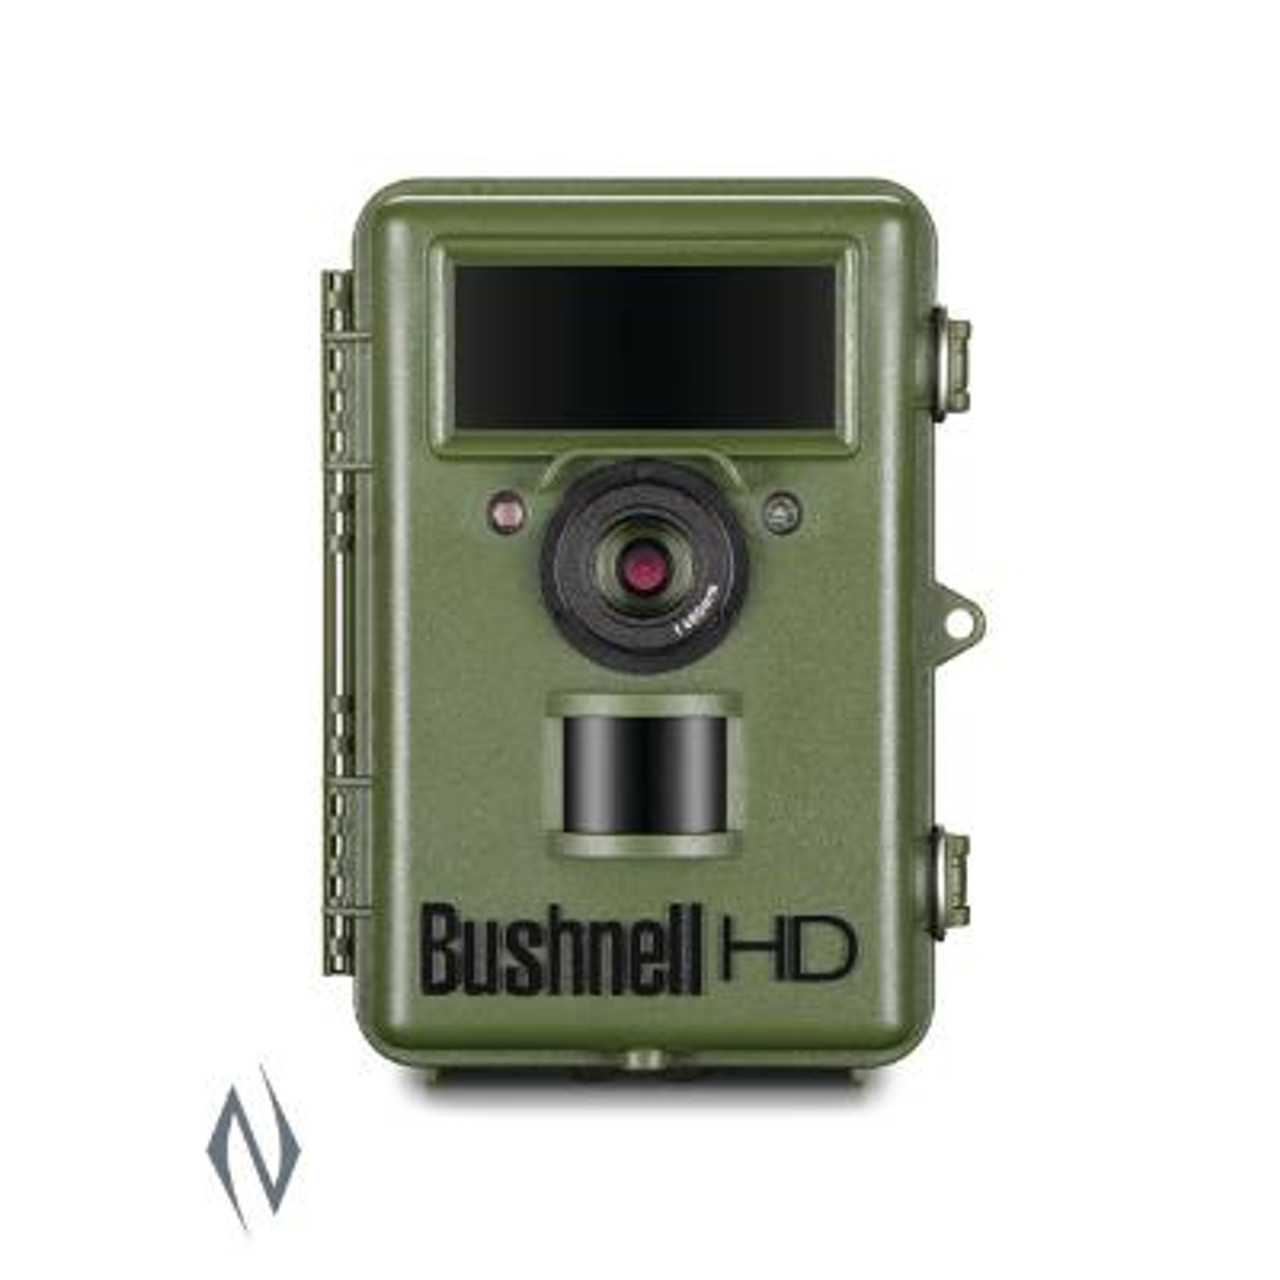 BUSHNELL NATUREVIEW CAM HD 14MP LIVE VIEW GREEN NO GLOW BU119740  Hunting Gear Trail Cameras  Accessories